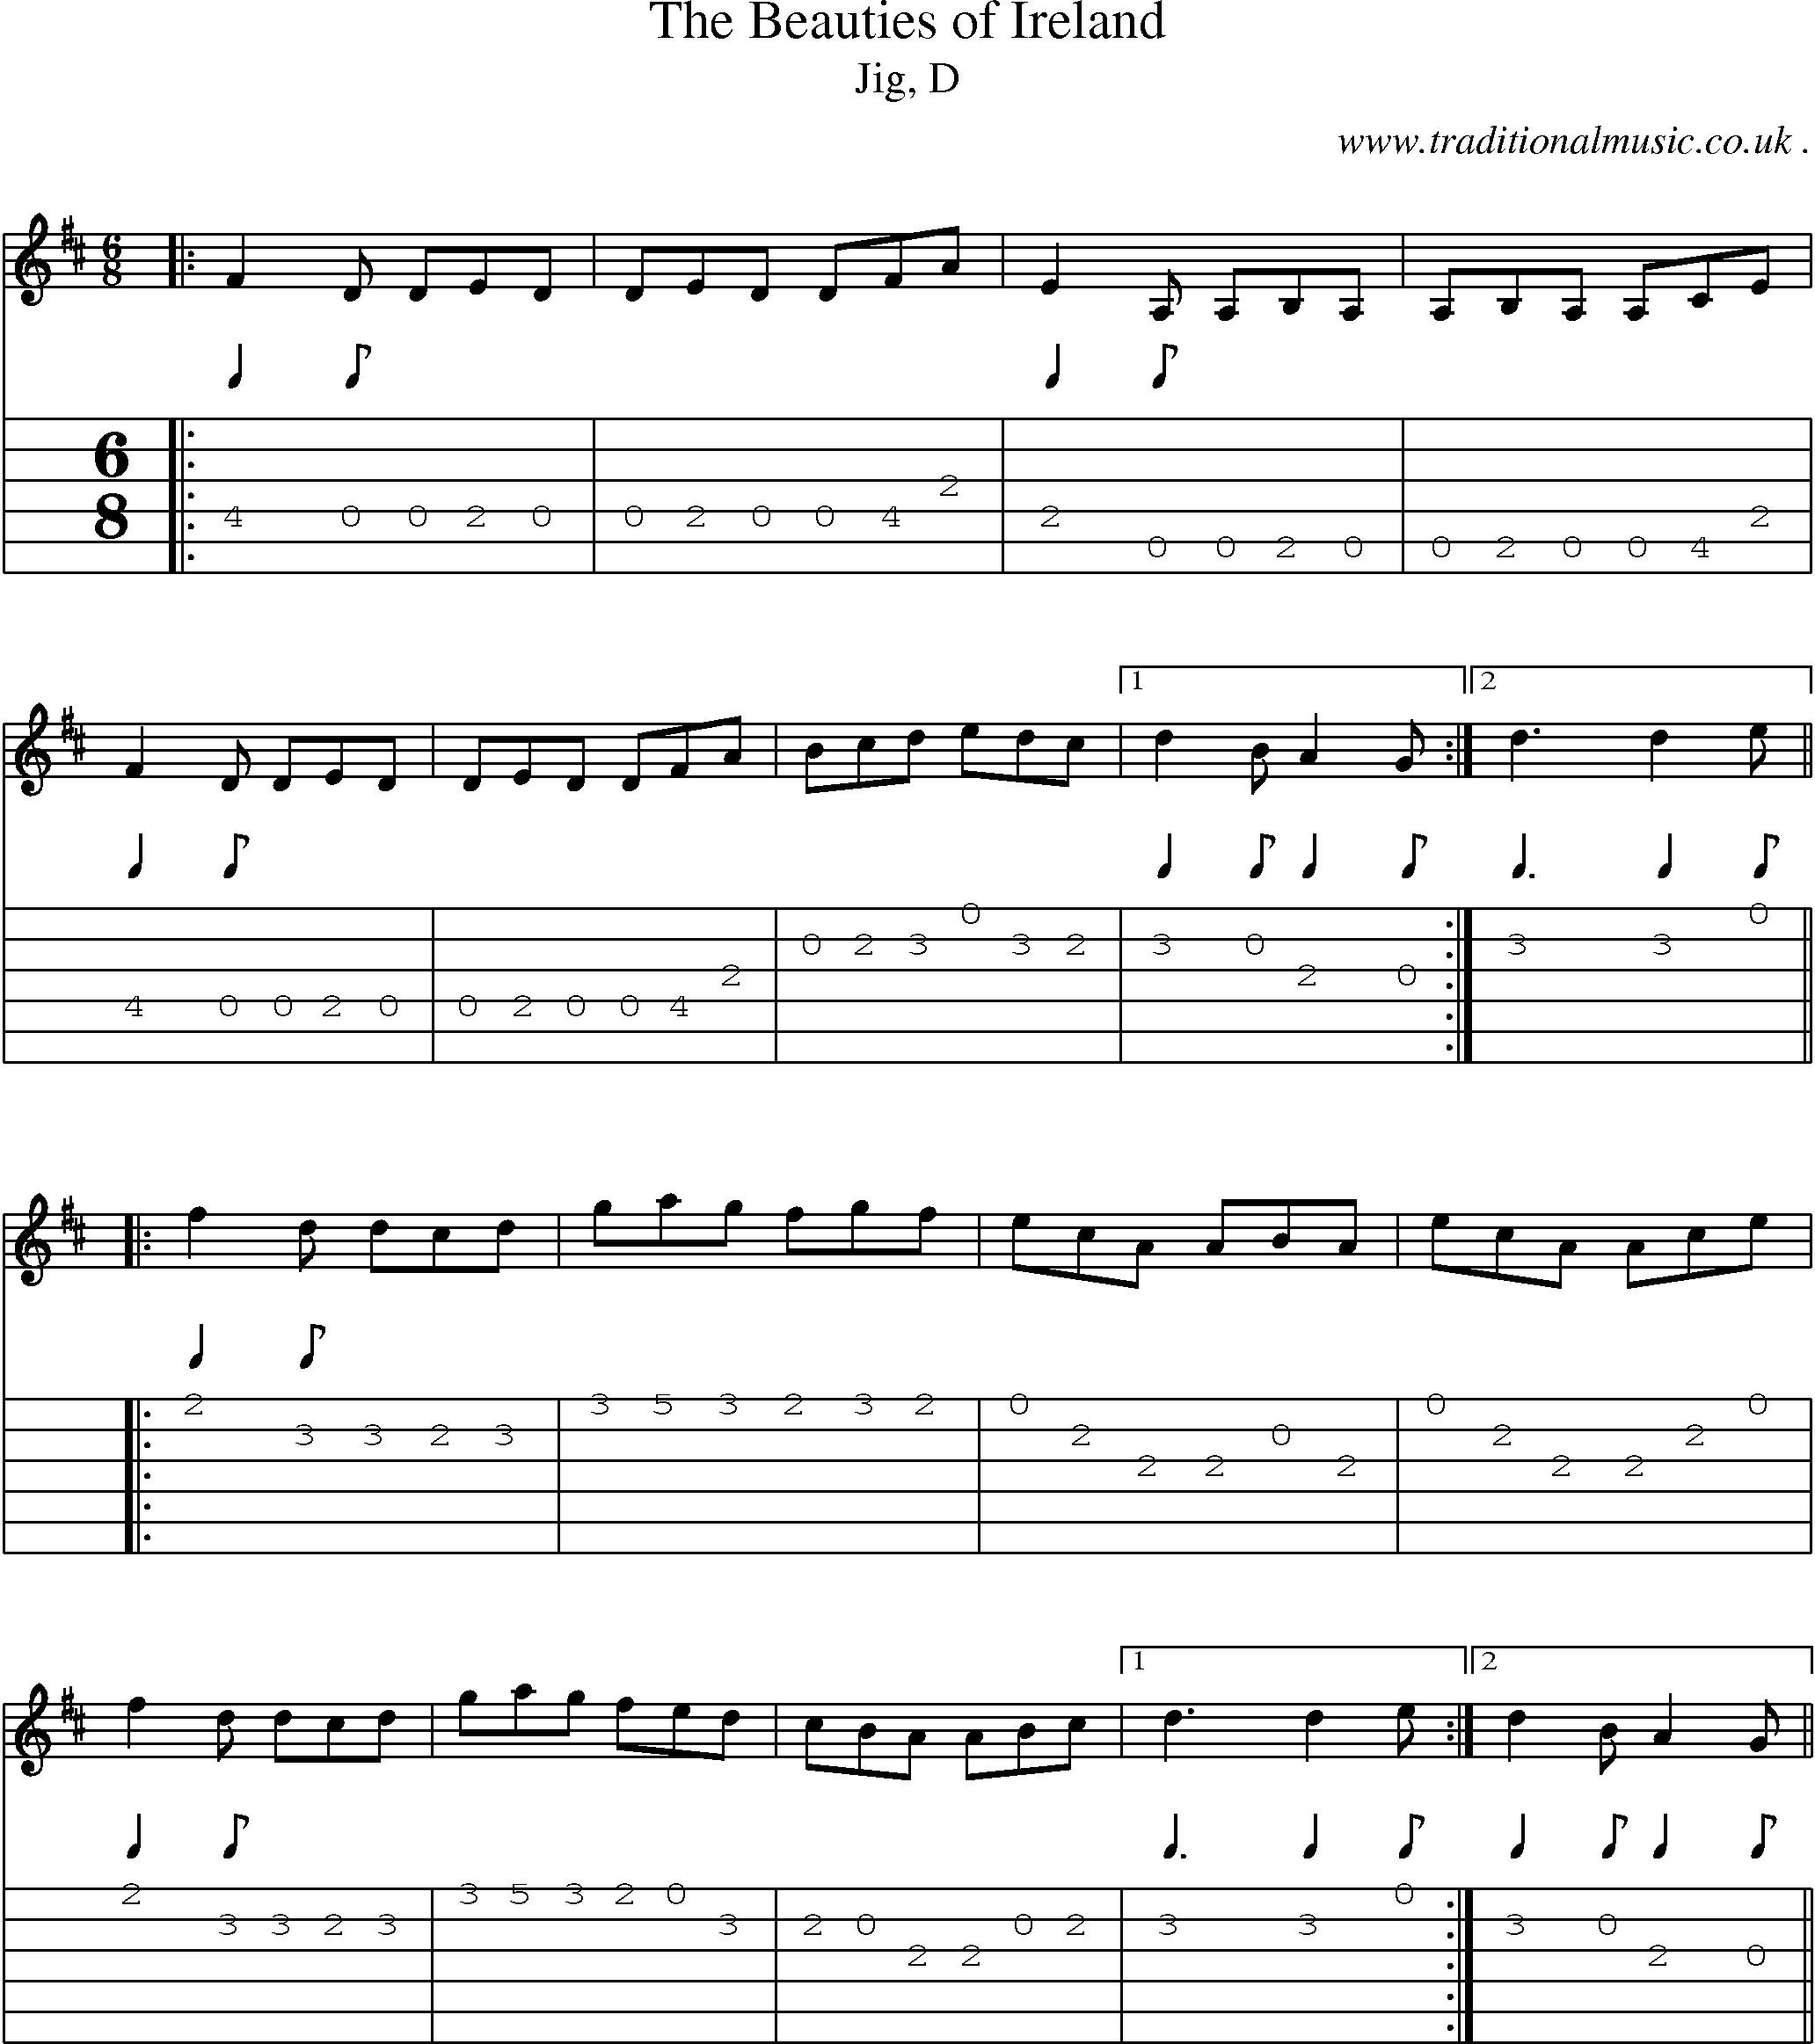 Sheet-music  score, Chords and Guitar Tabs for The Beauties Of Ireland